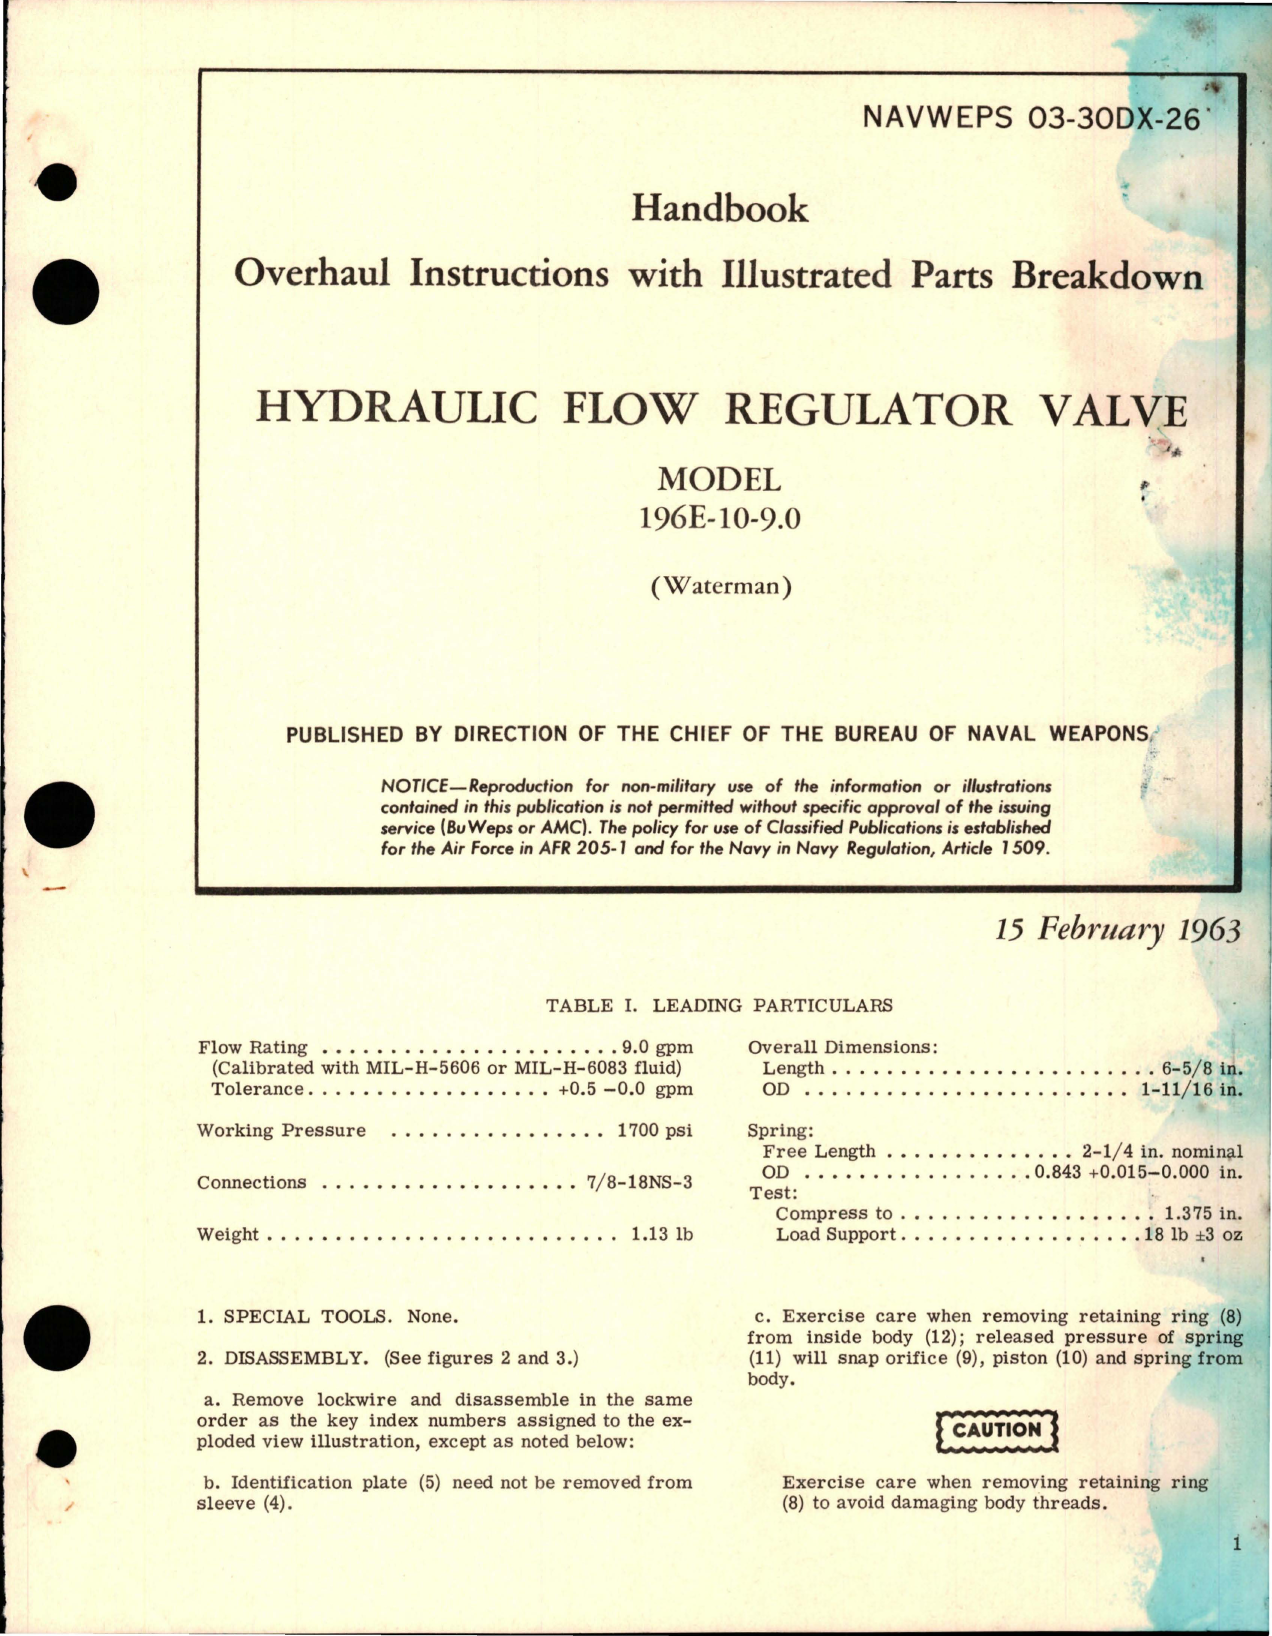 Sample page 1 from AirCorps Library document: Overhaul Instructions with Illustrated Parts Breakdown for Hydraulic Flow Regulator Valve - Model 196E-10-9.0